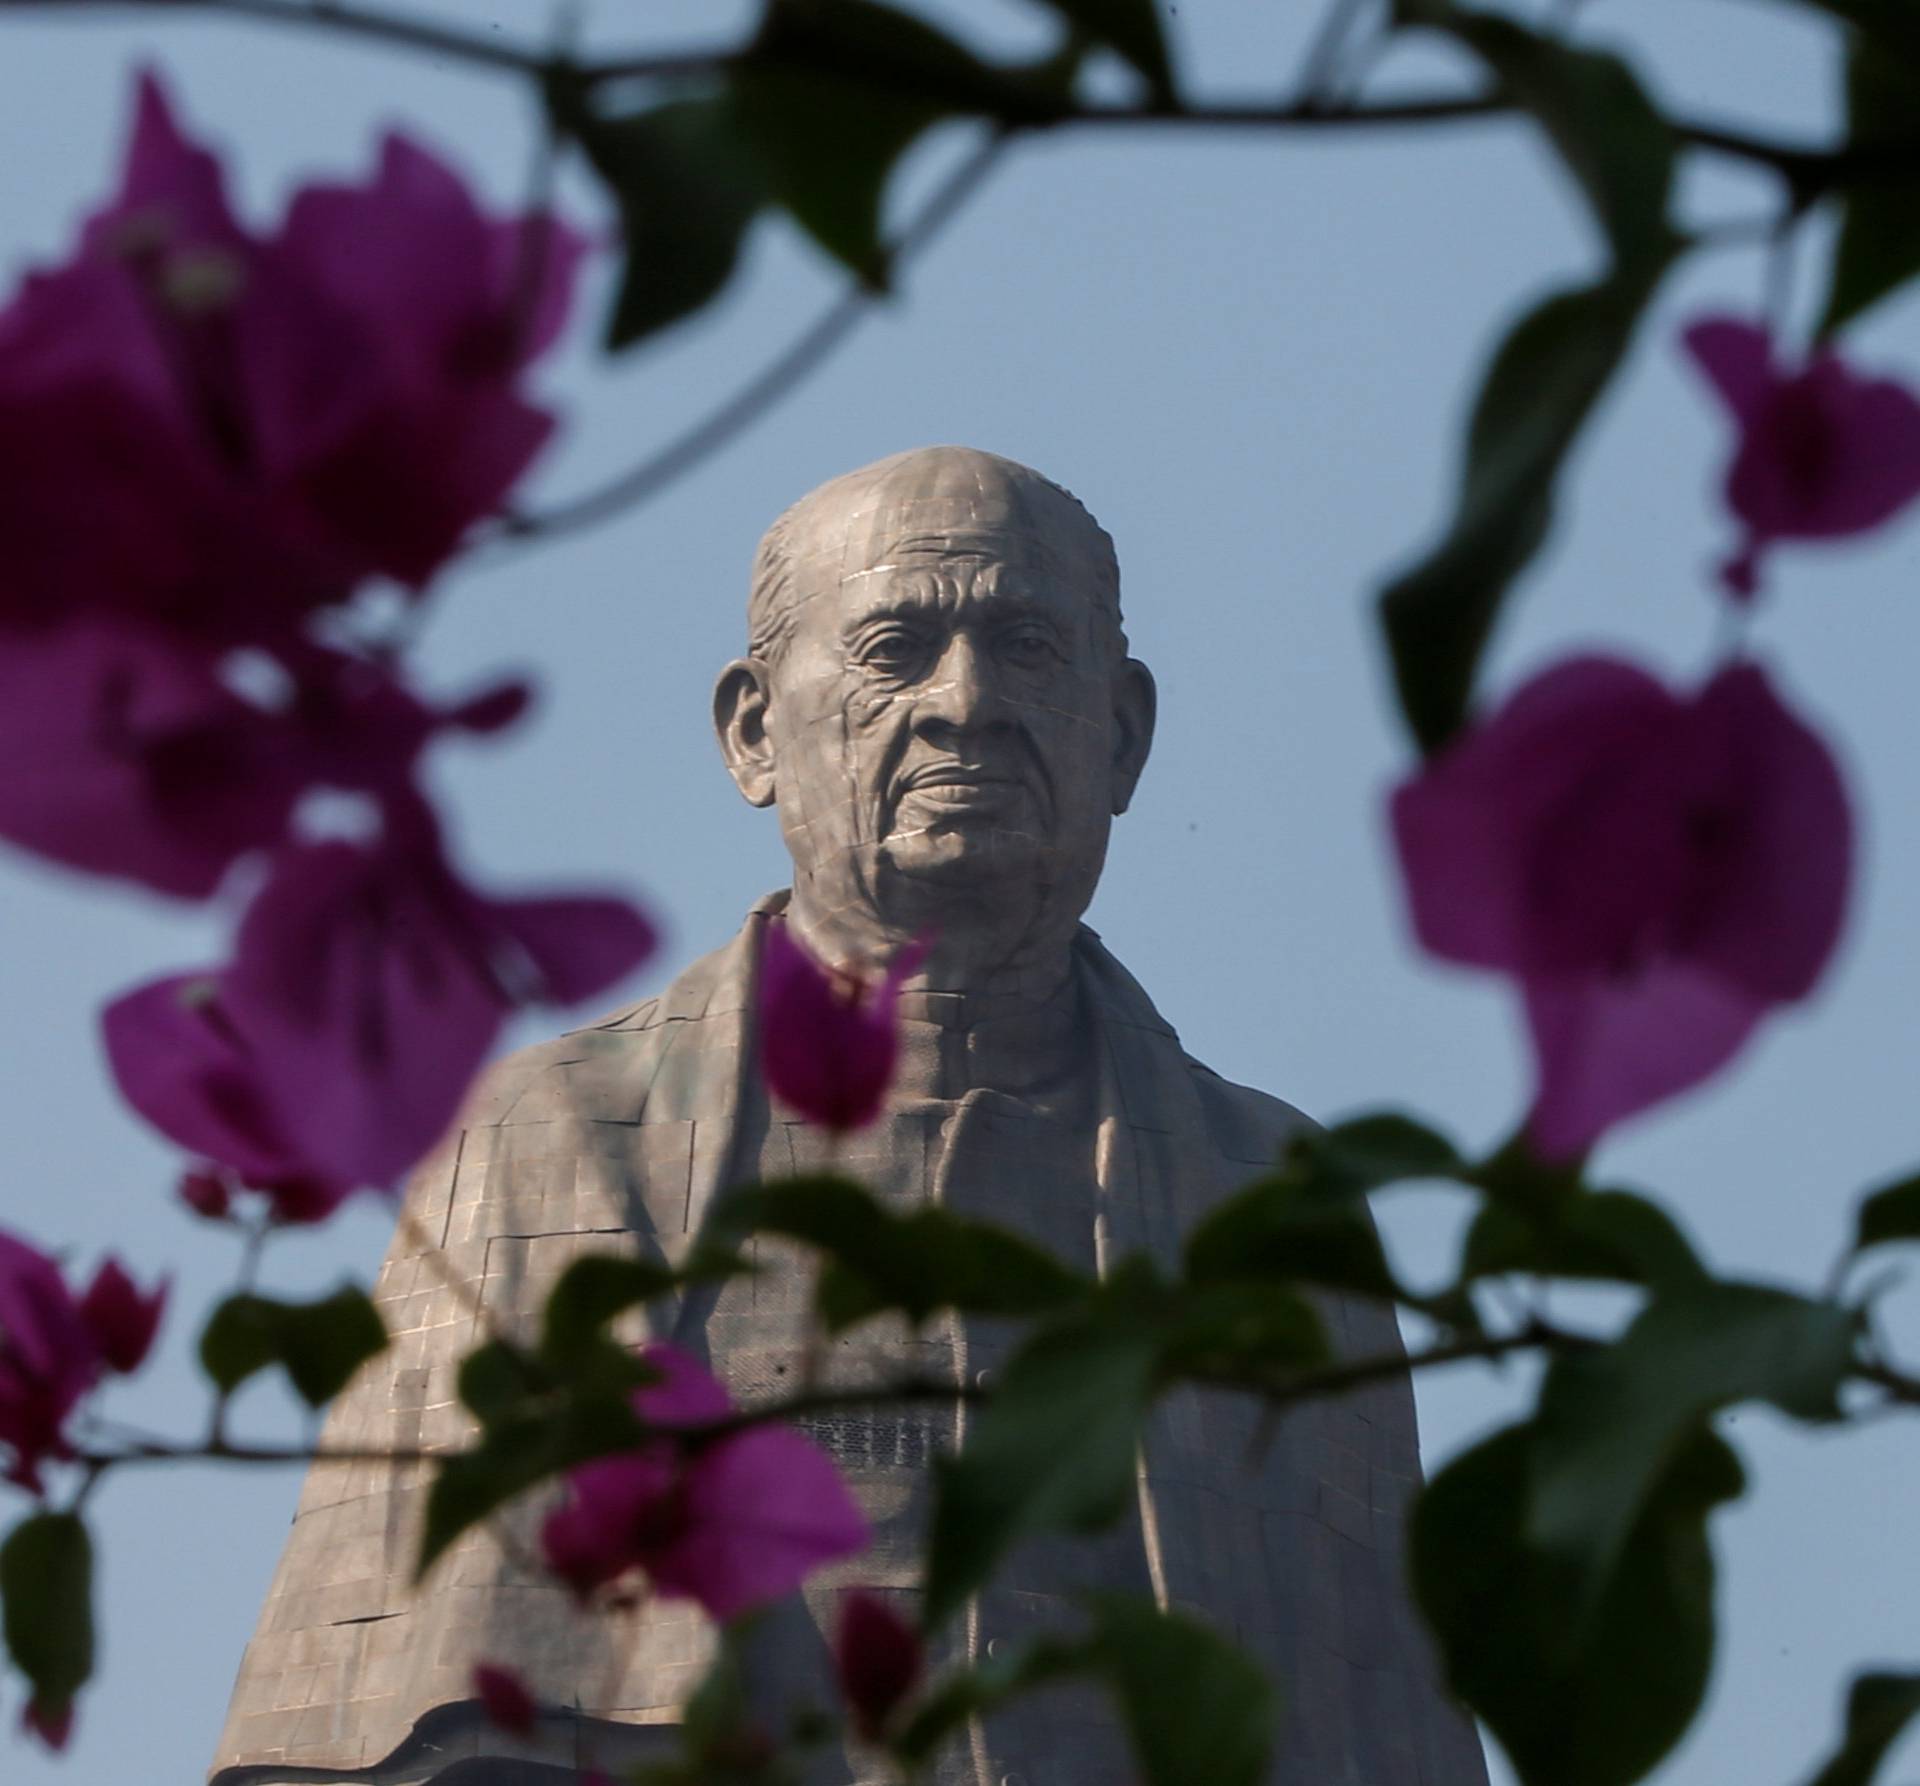 General view of the "Statue of Unity" portraying Sardar Vallabhbhai Patel, one of the founding fathers of India, during its inauguration in Kevadia